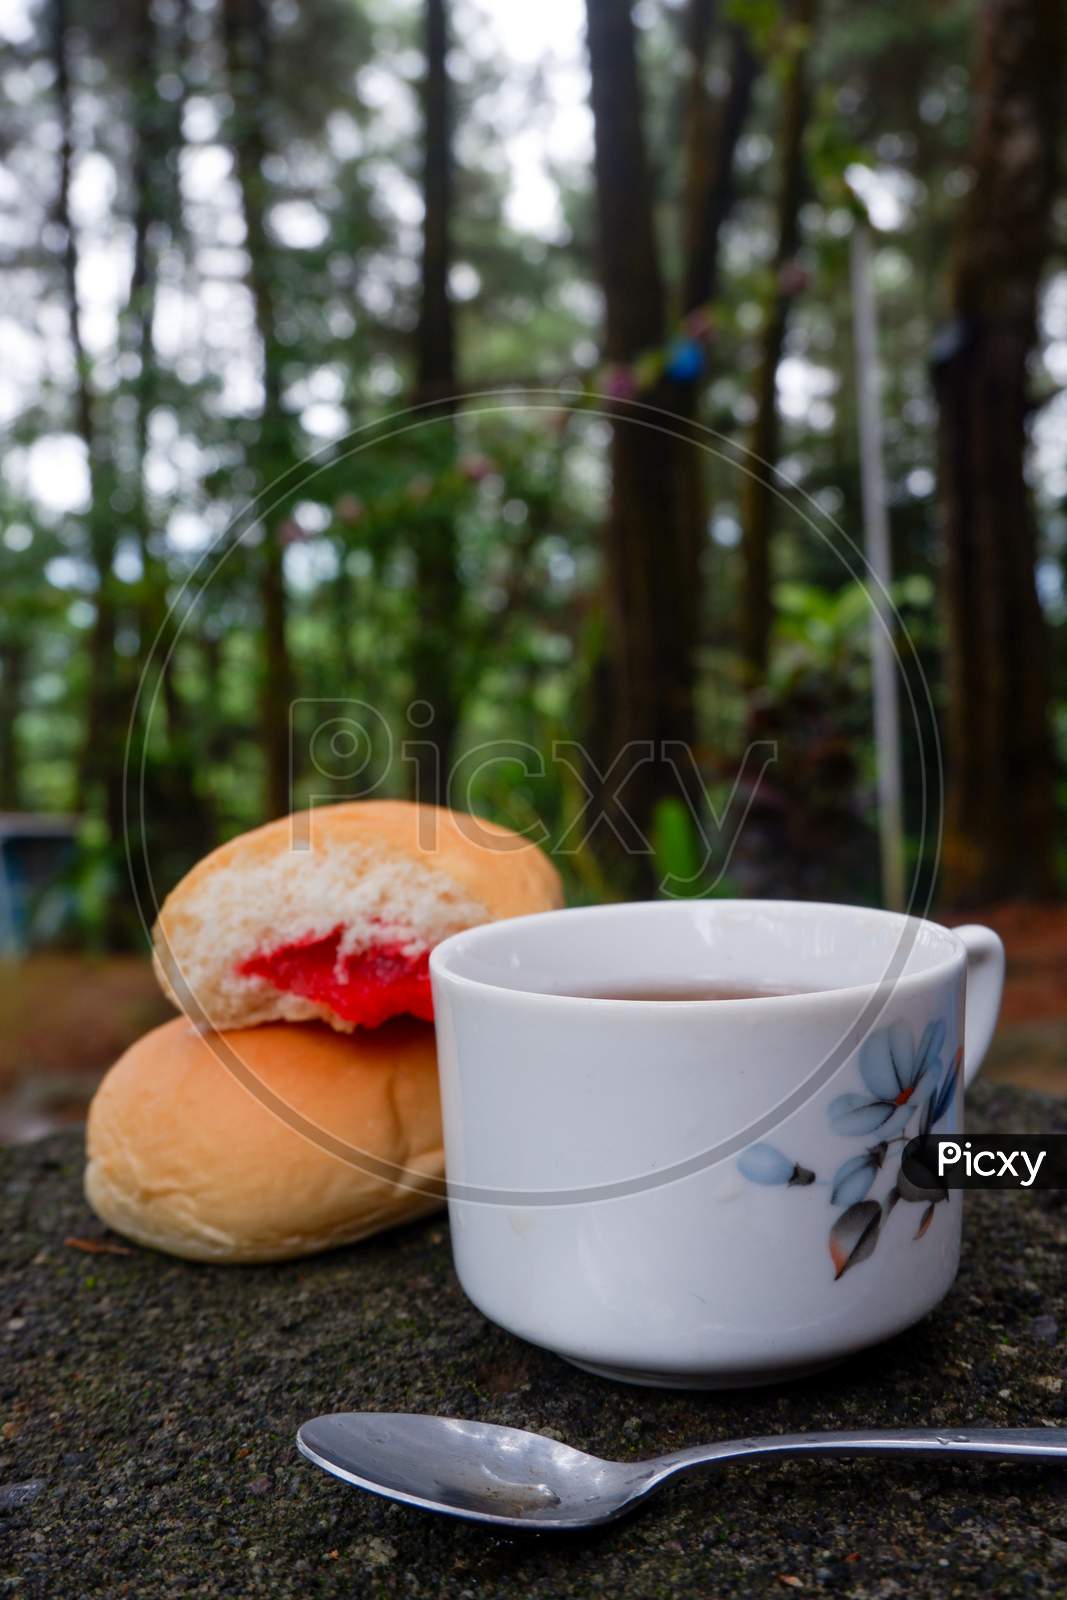 Photo Of Bread With Strawberry Jam With A Cup Of Tea. In A Photo In A Forest